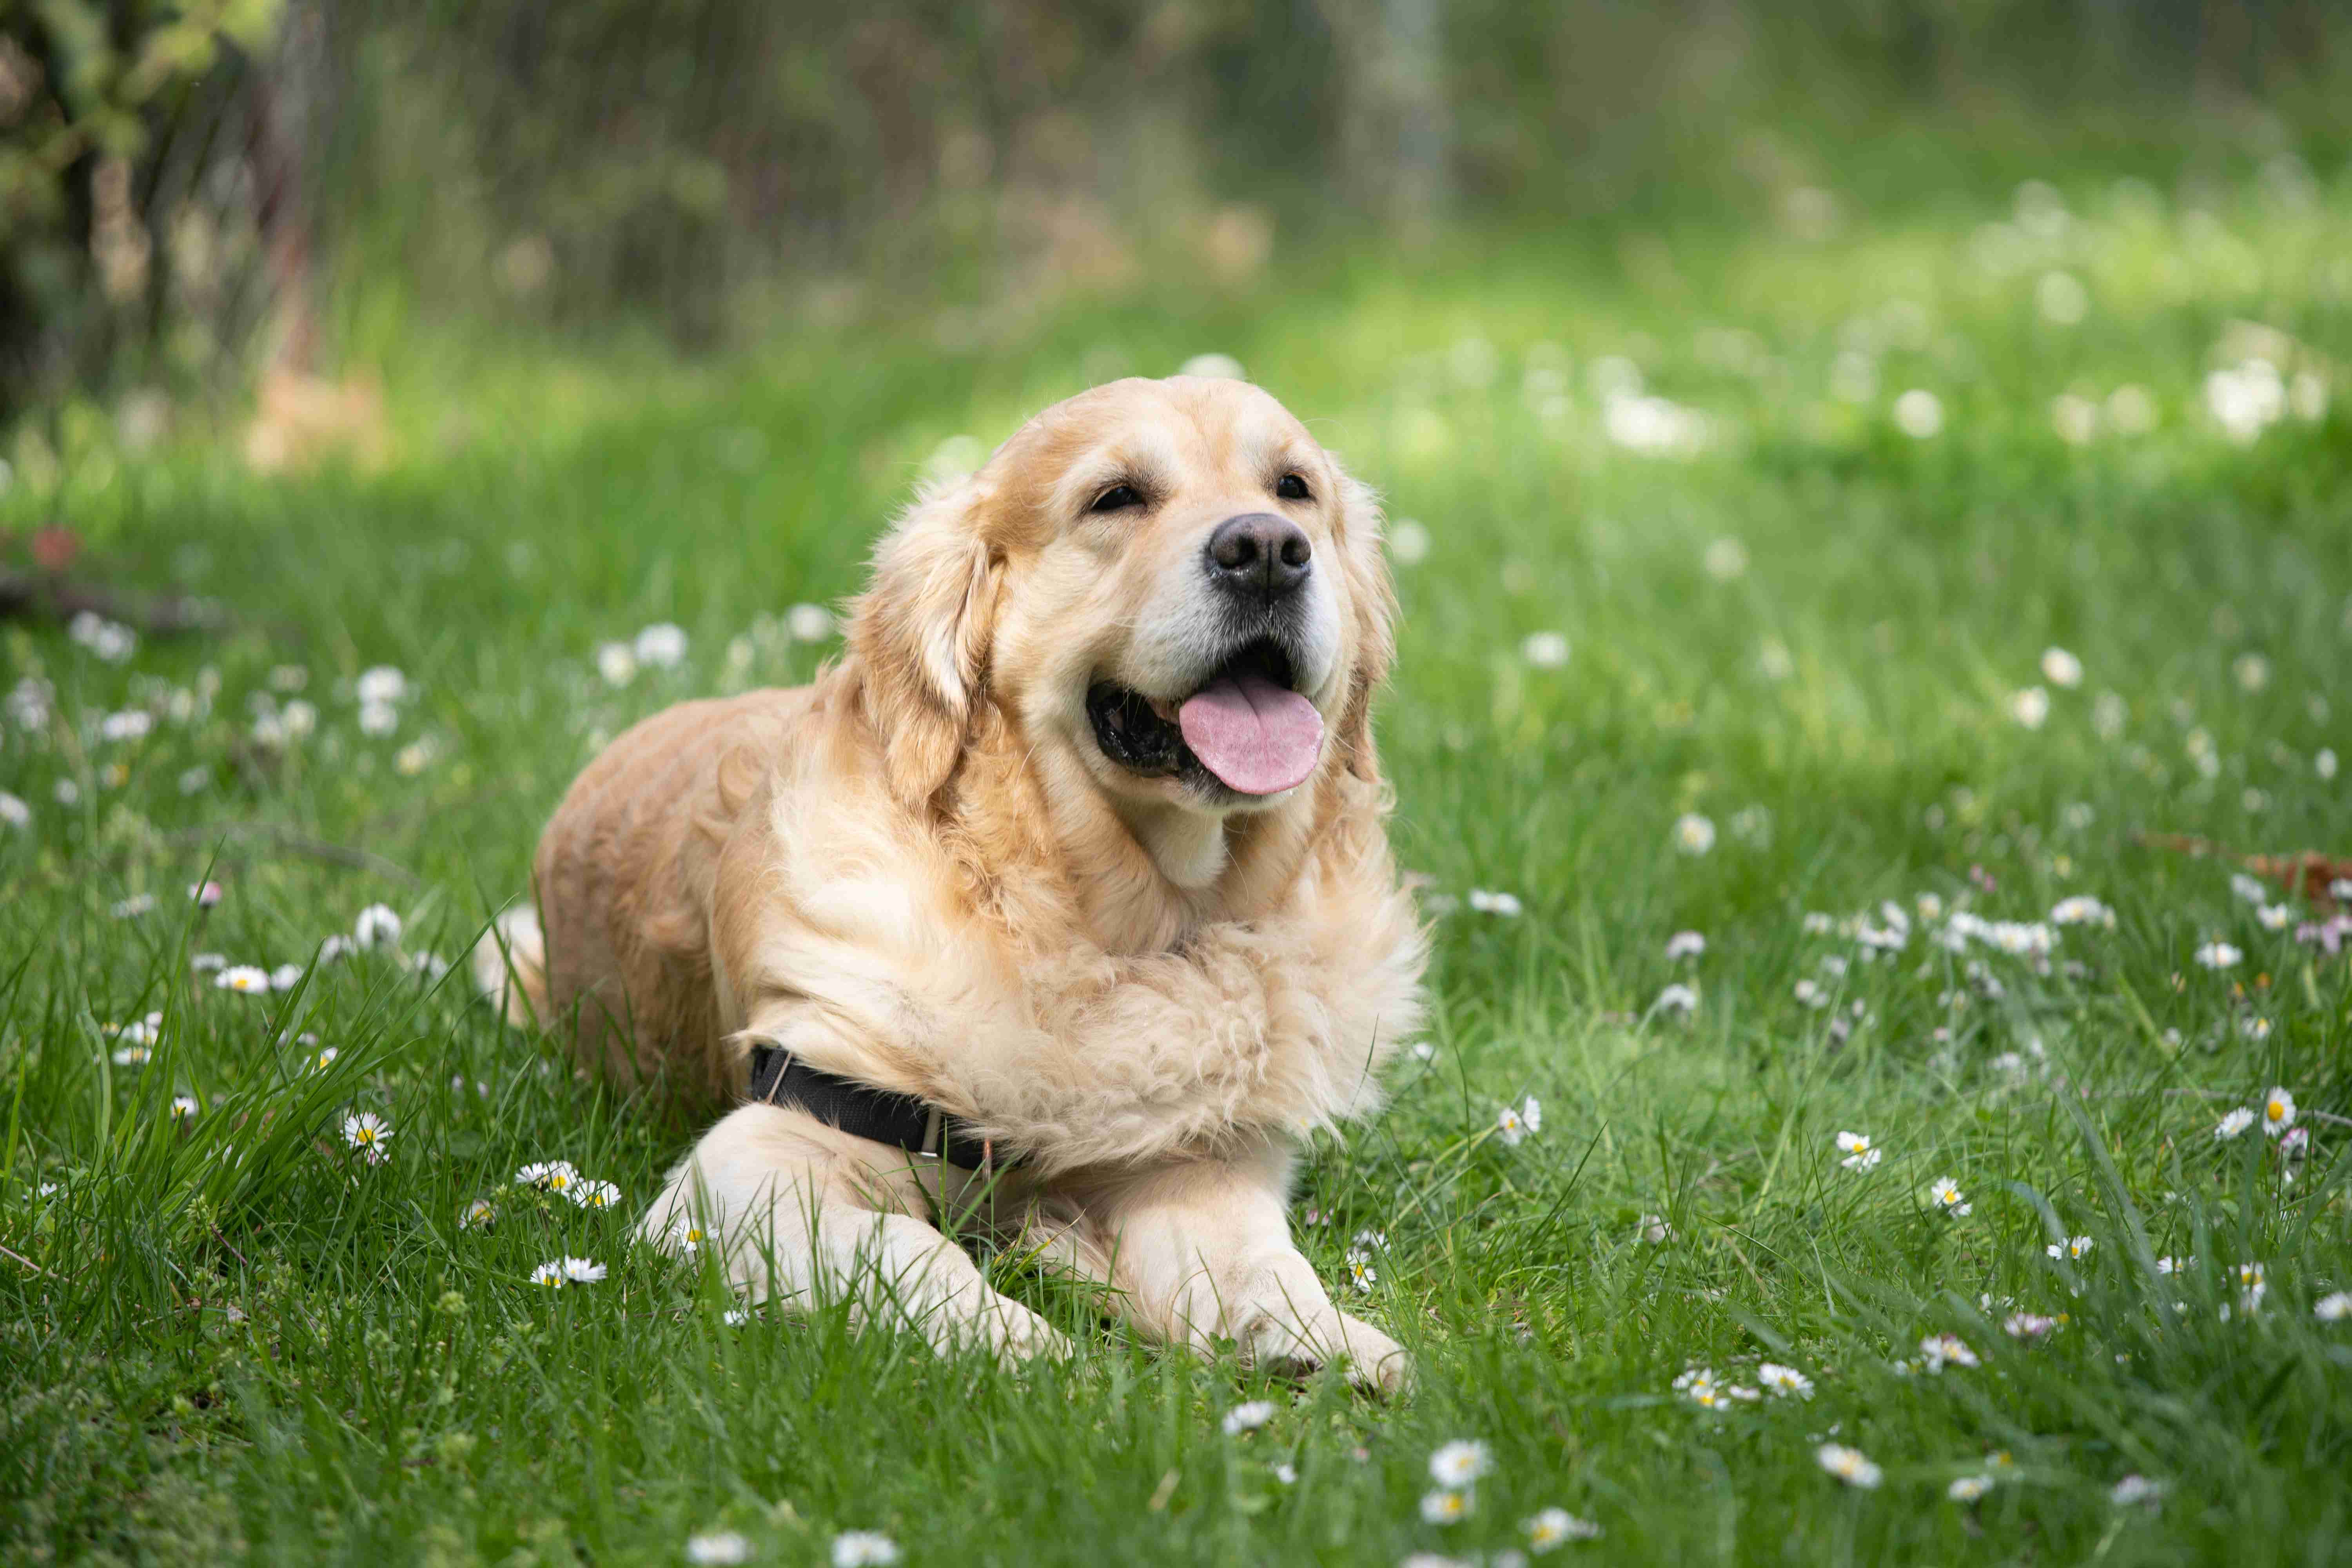 What are some signs of anxiety or stress in a Golden Retriever?